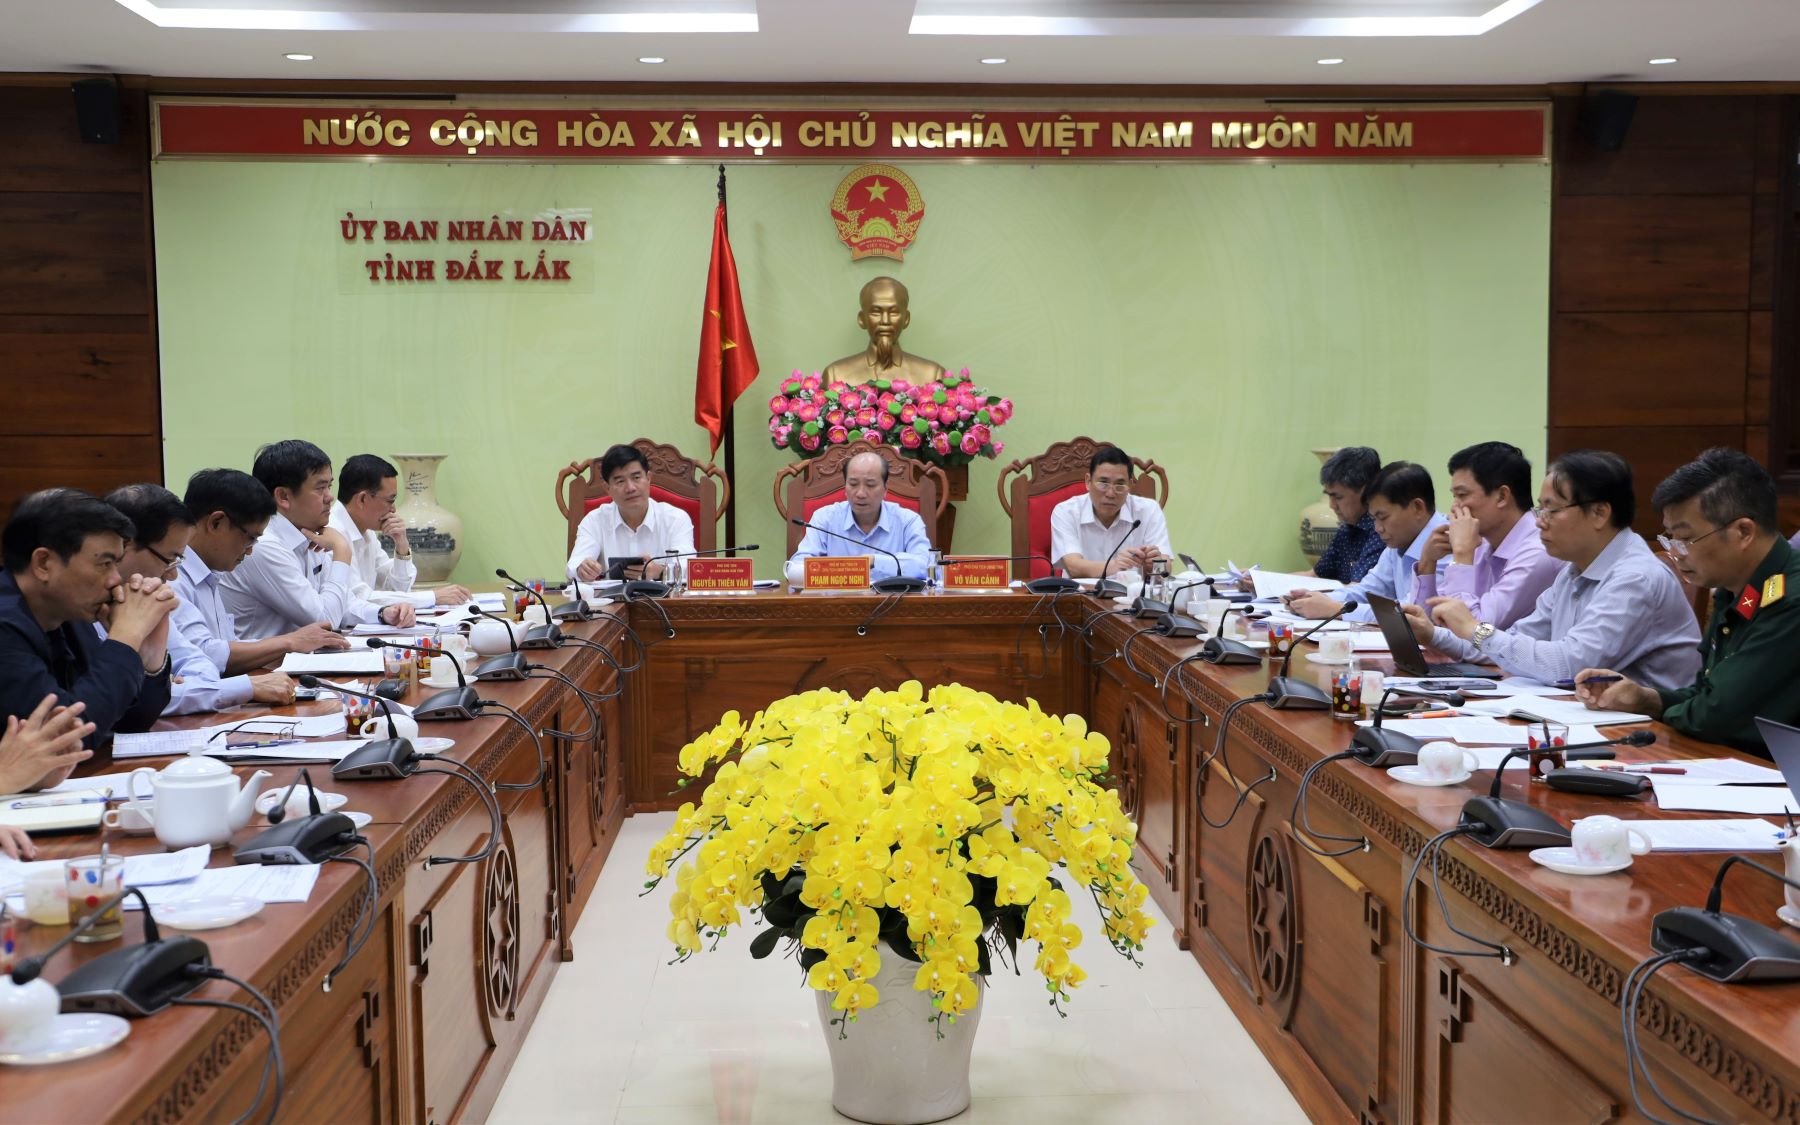 Accelerating the Construction Progress of the Khanh Hoa - Buon Ma Thuot Highway Project Phase 1